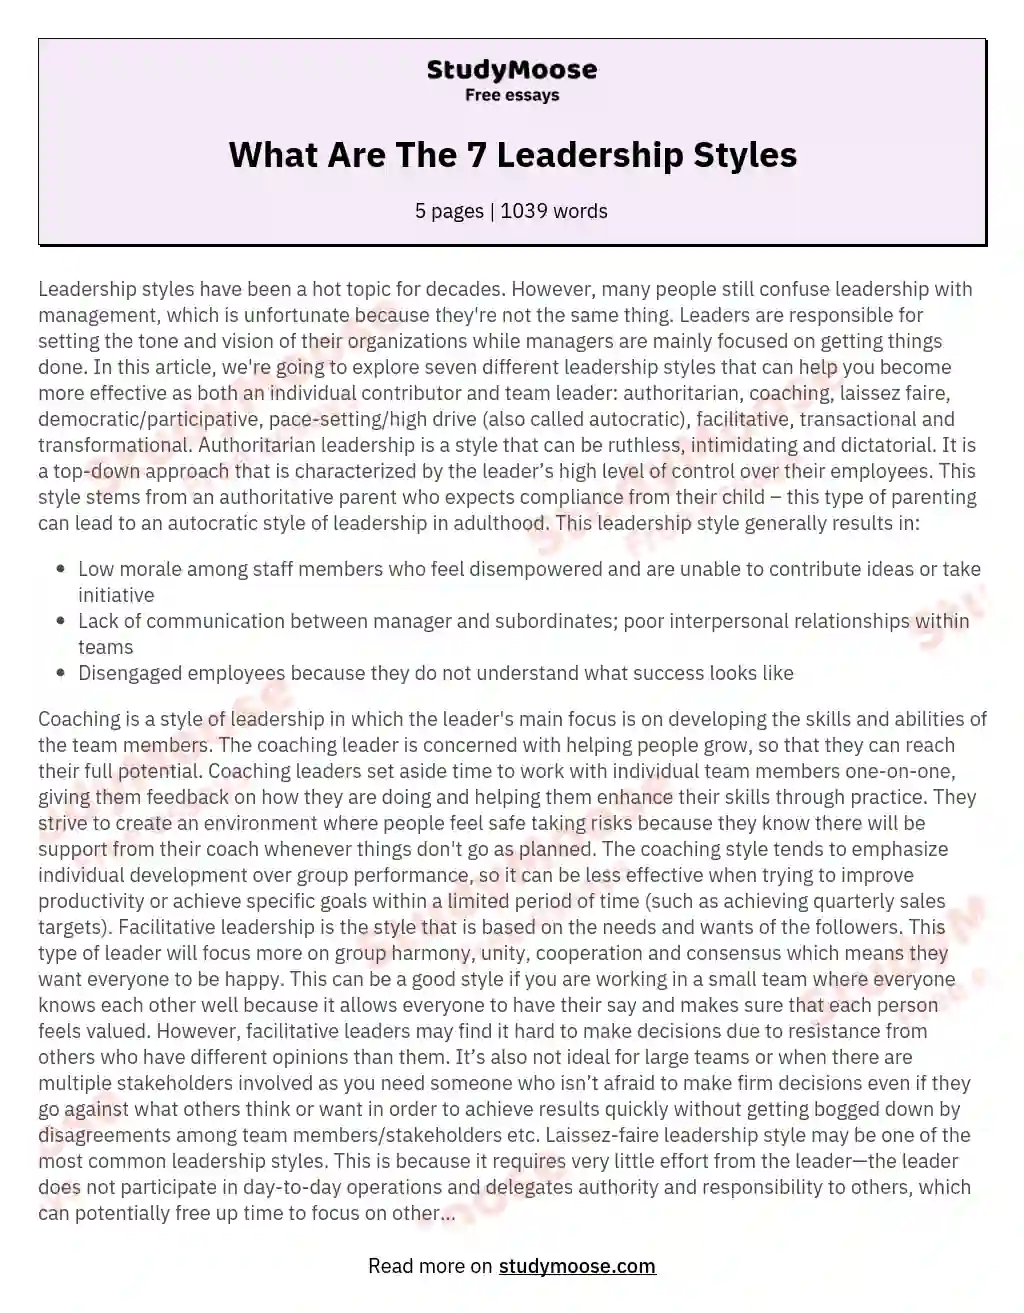 What Are The 7 Leadership Styles essay